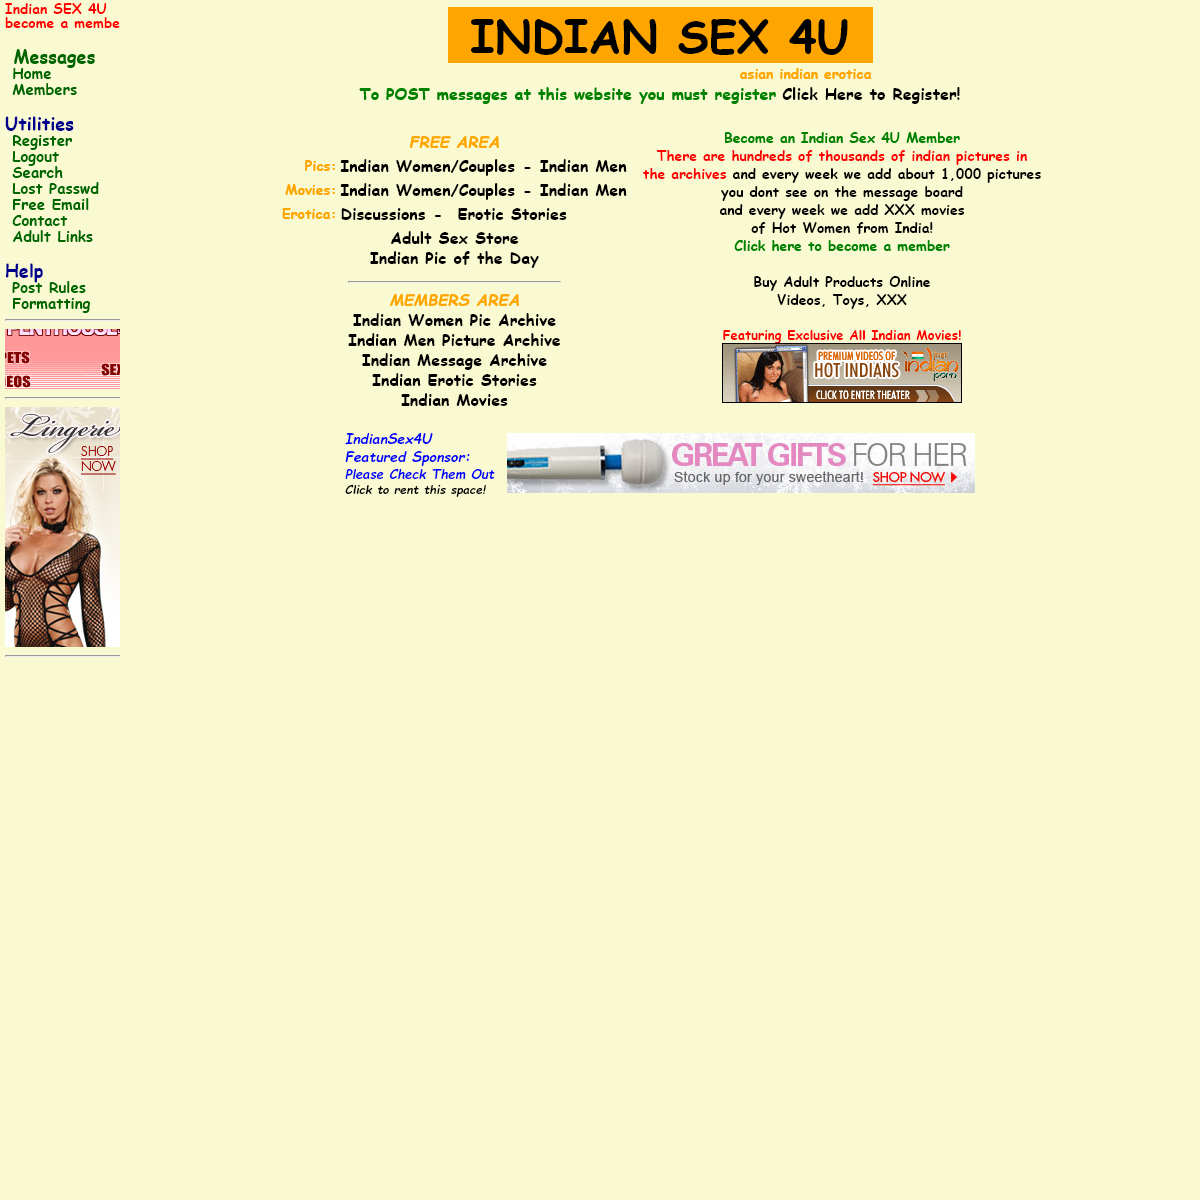 A complete backup of www.www.indiansex4u.com